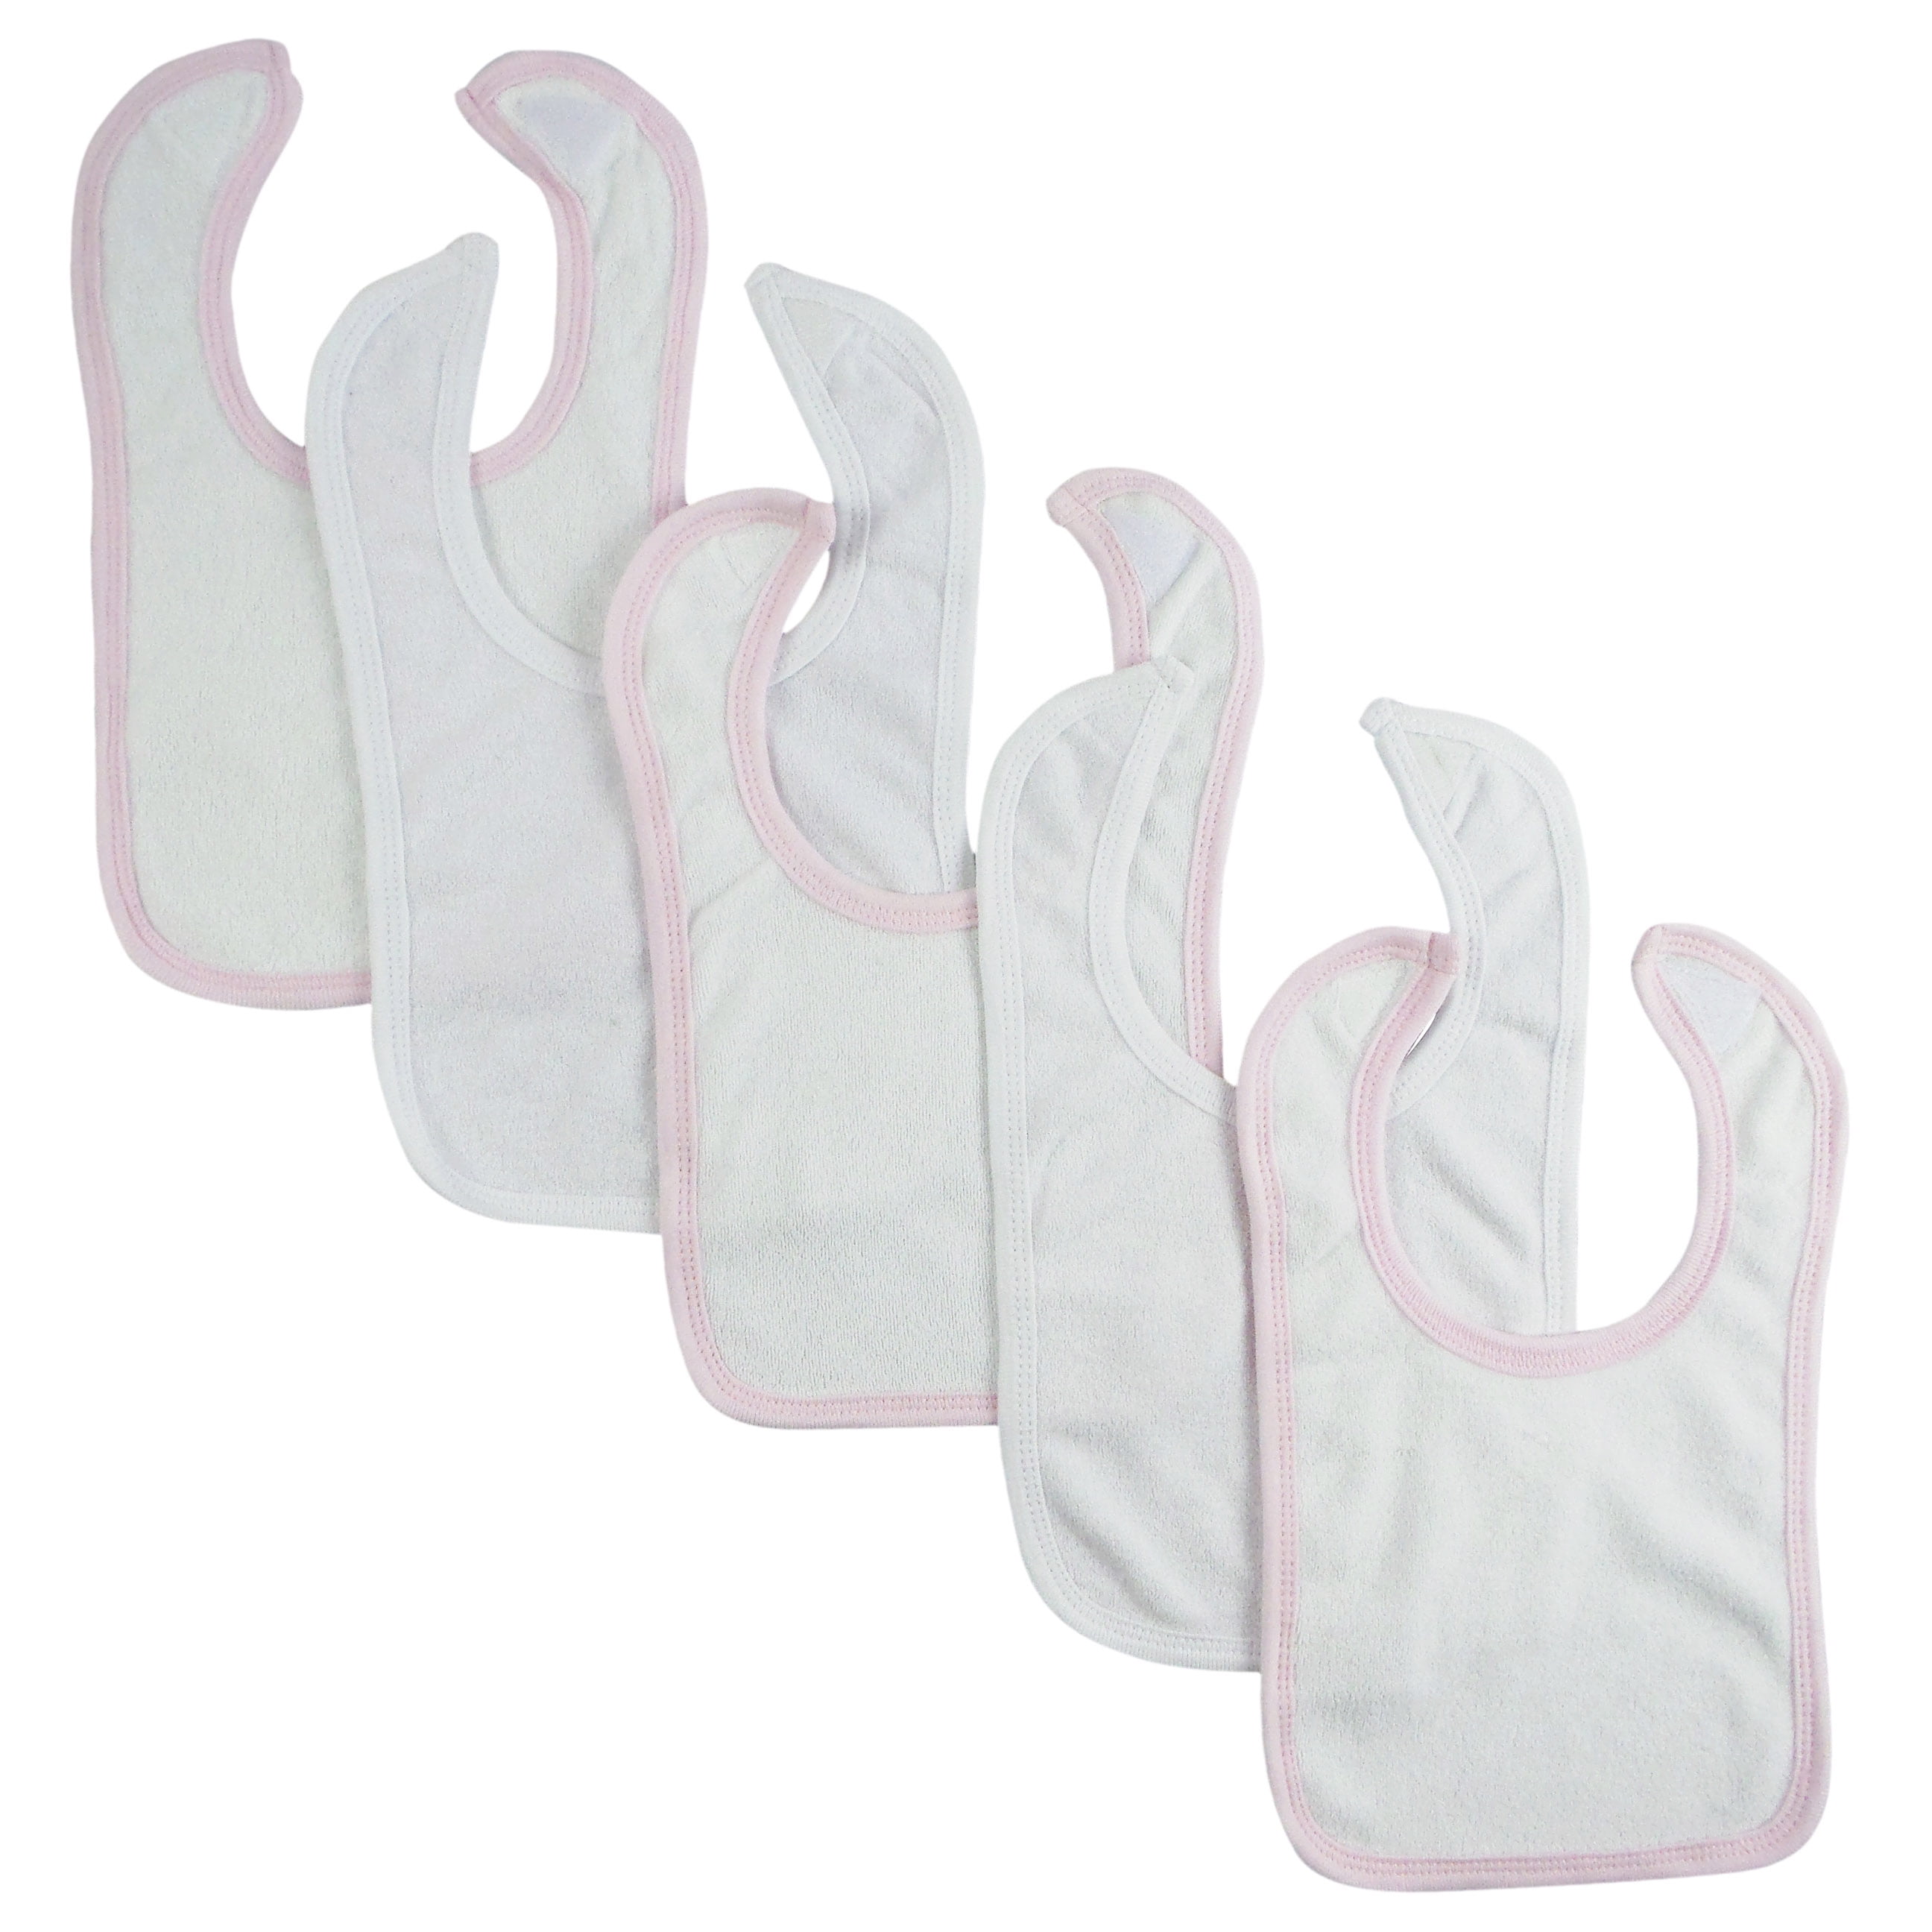 12.25 X 7.5 In. Infant Boys Drool Bibs, White & Pink - Pack Of 5